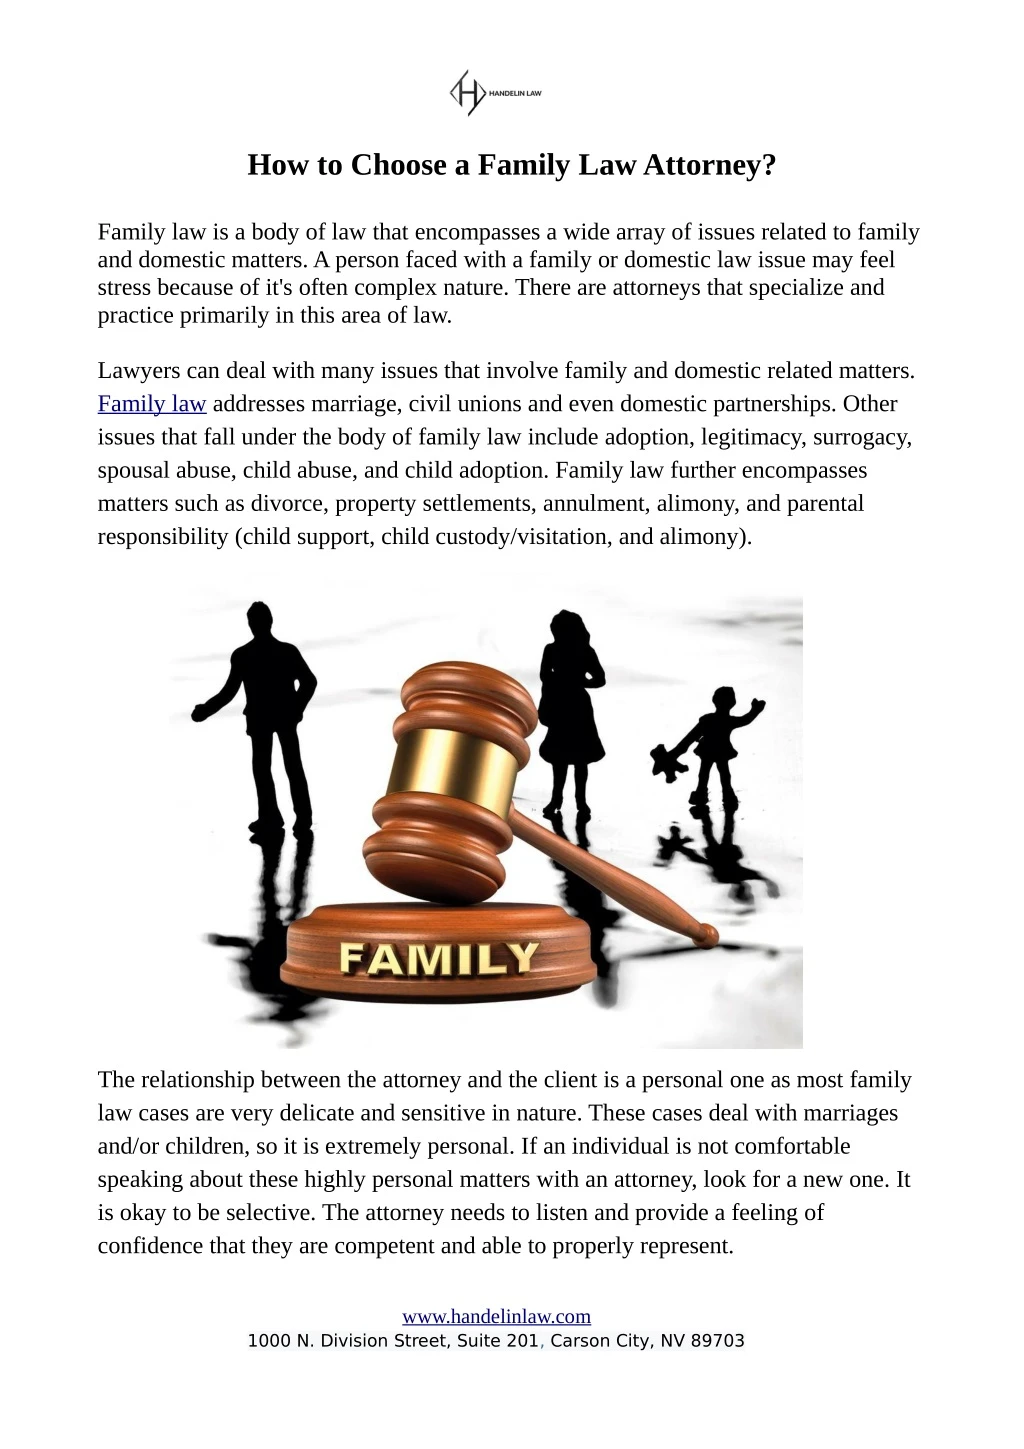 how to choose a family law attorney